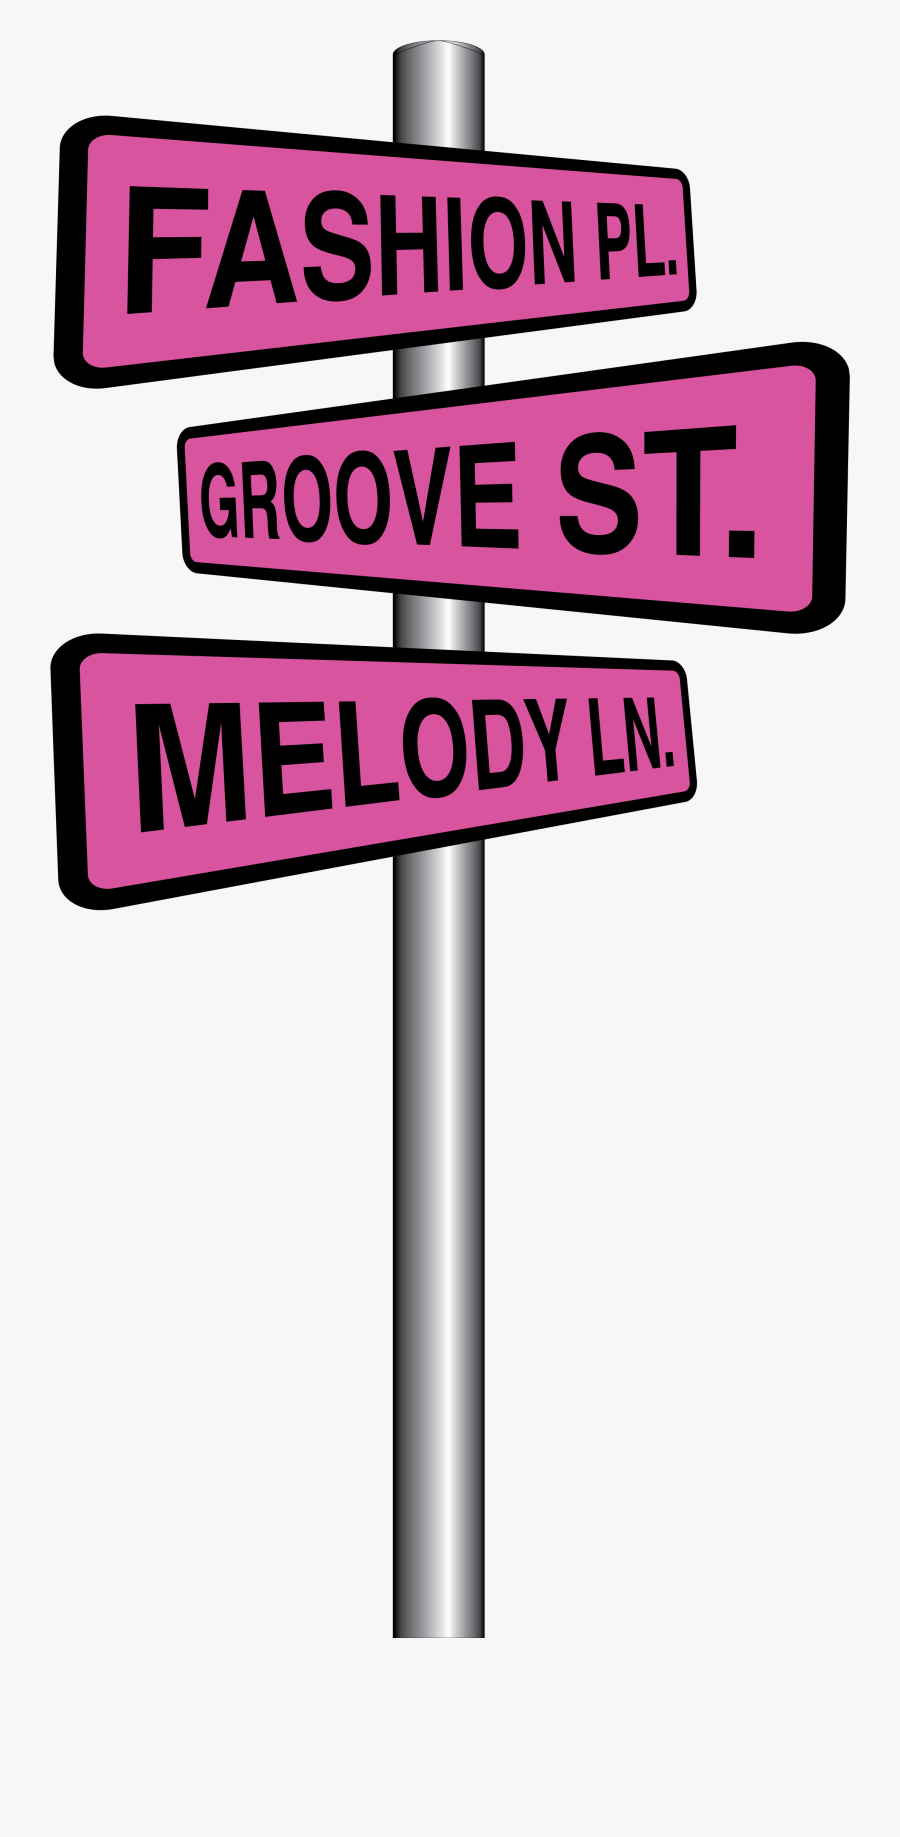 Home Edition Street Signs - Street Signage Design Png, Transparent Clipart